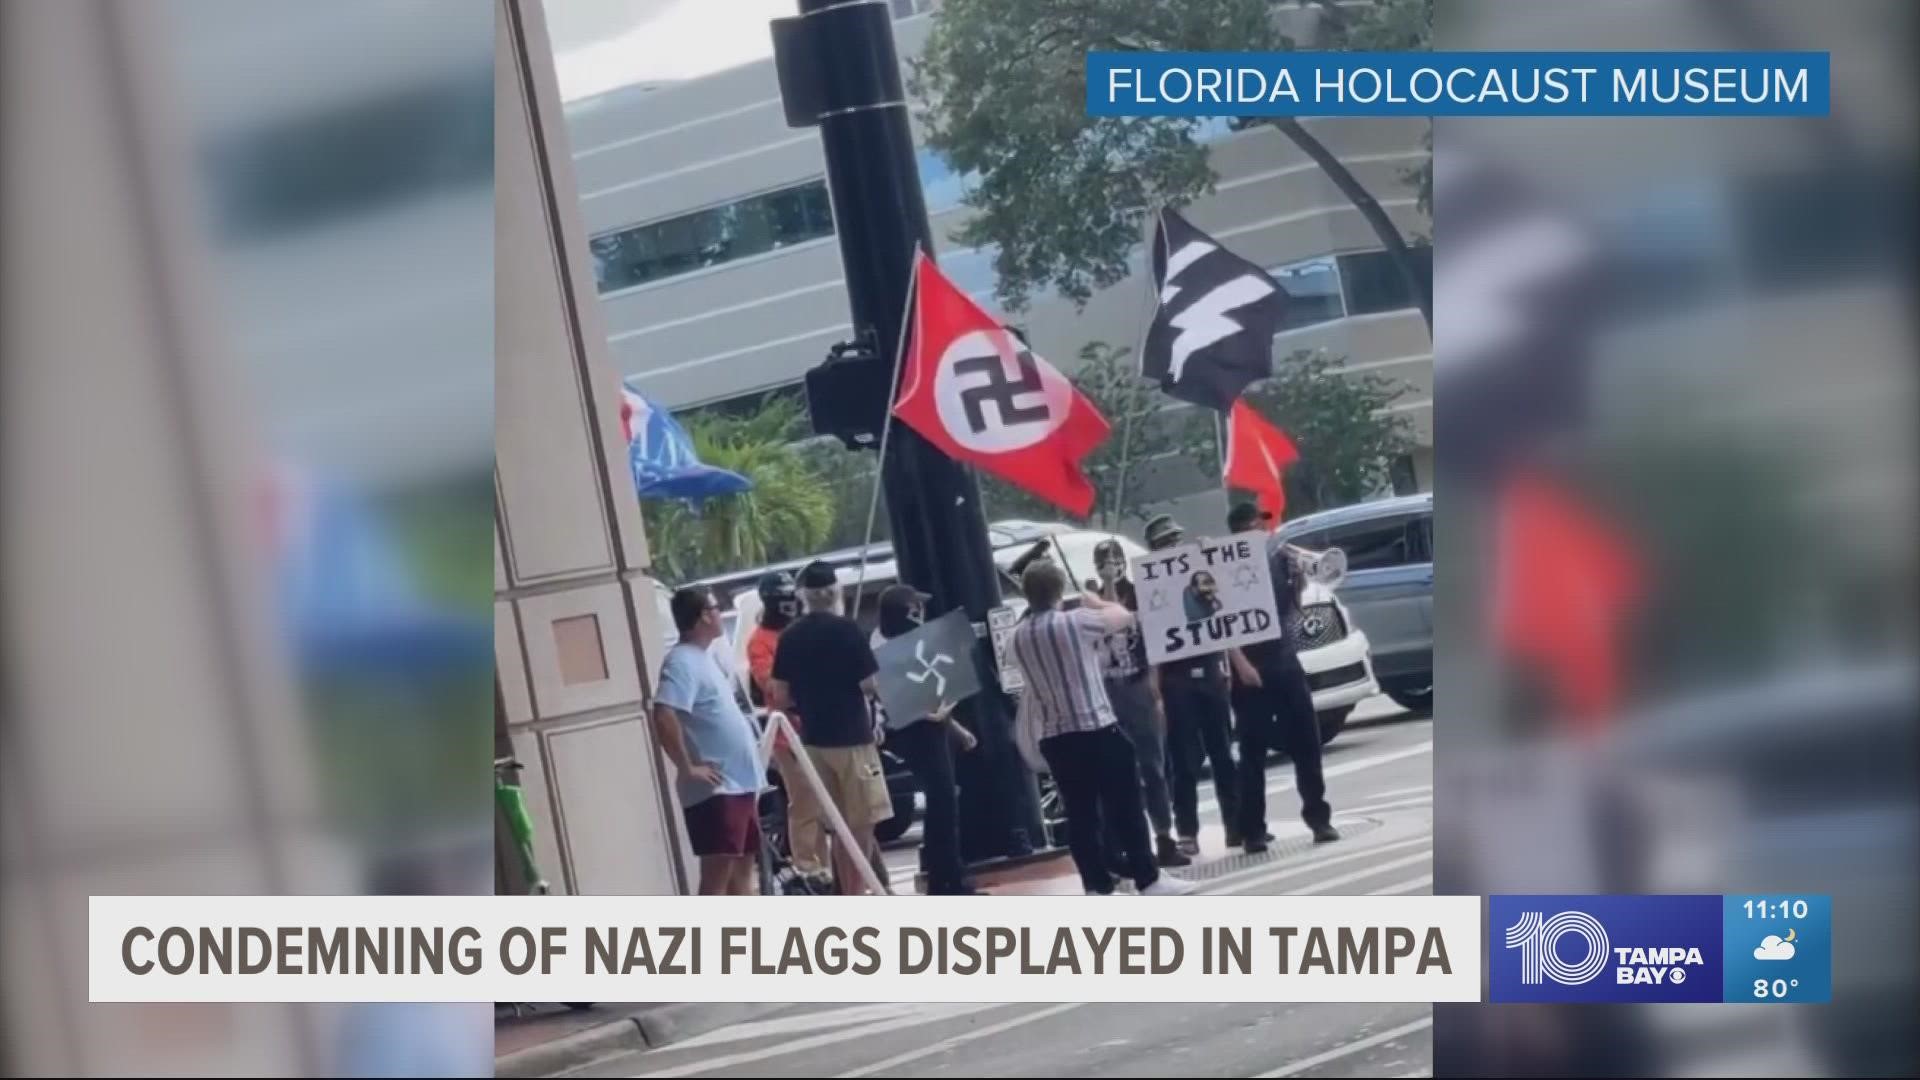 The Florida Holocaust Museum says pictures of the antisemitic display were sent to the museum by people near the area.